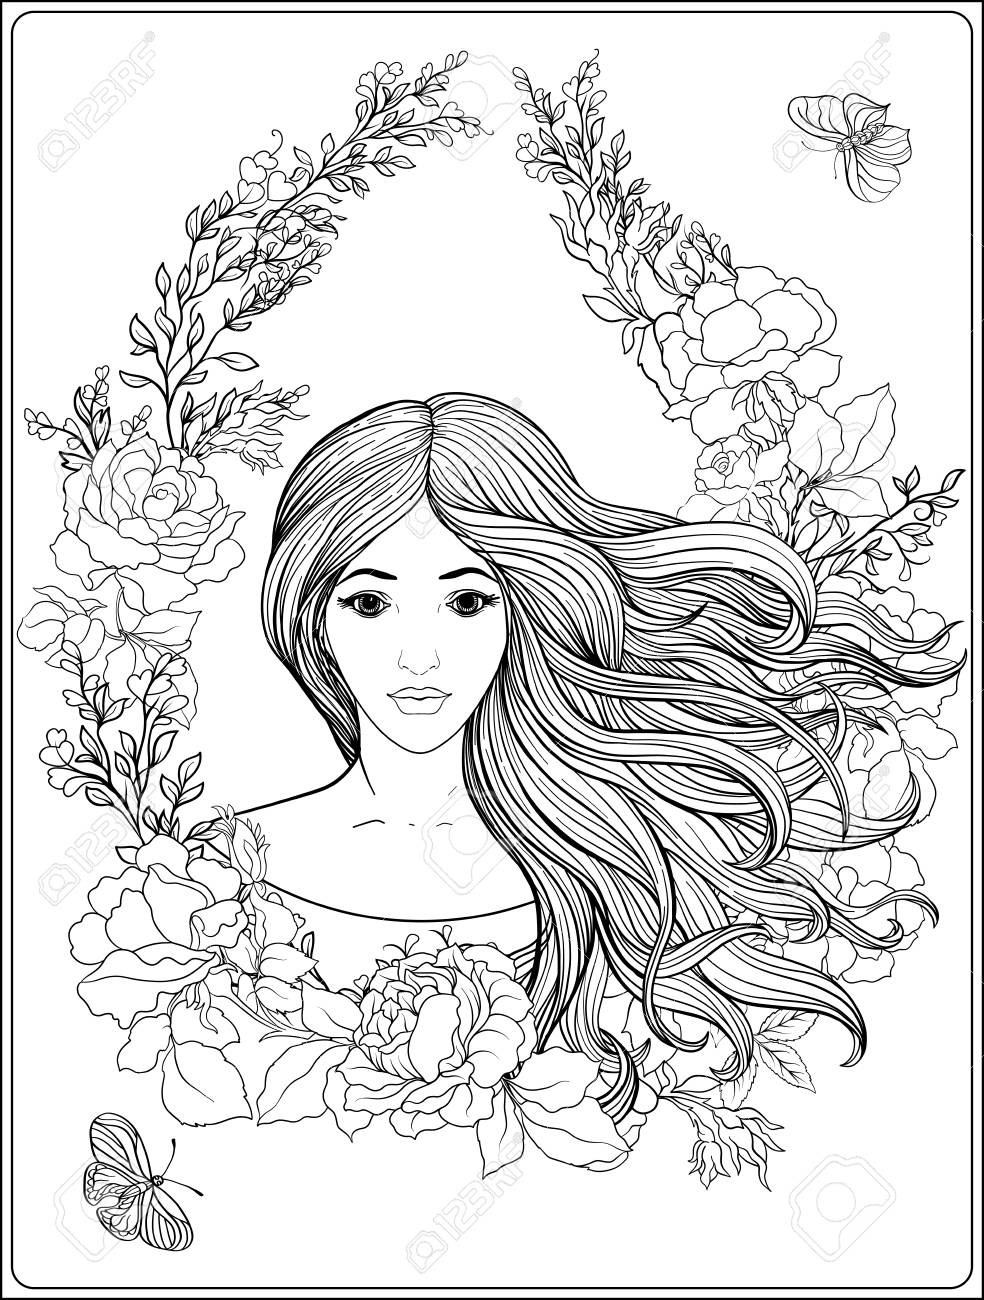 Coloring Pages Of Pretty Girls
 Girl With Long Hair Drawing at GetDrawings